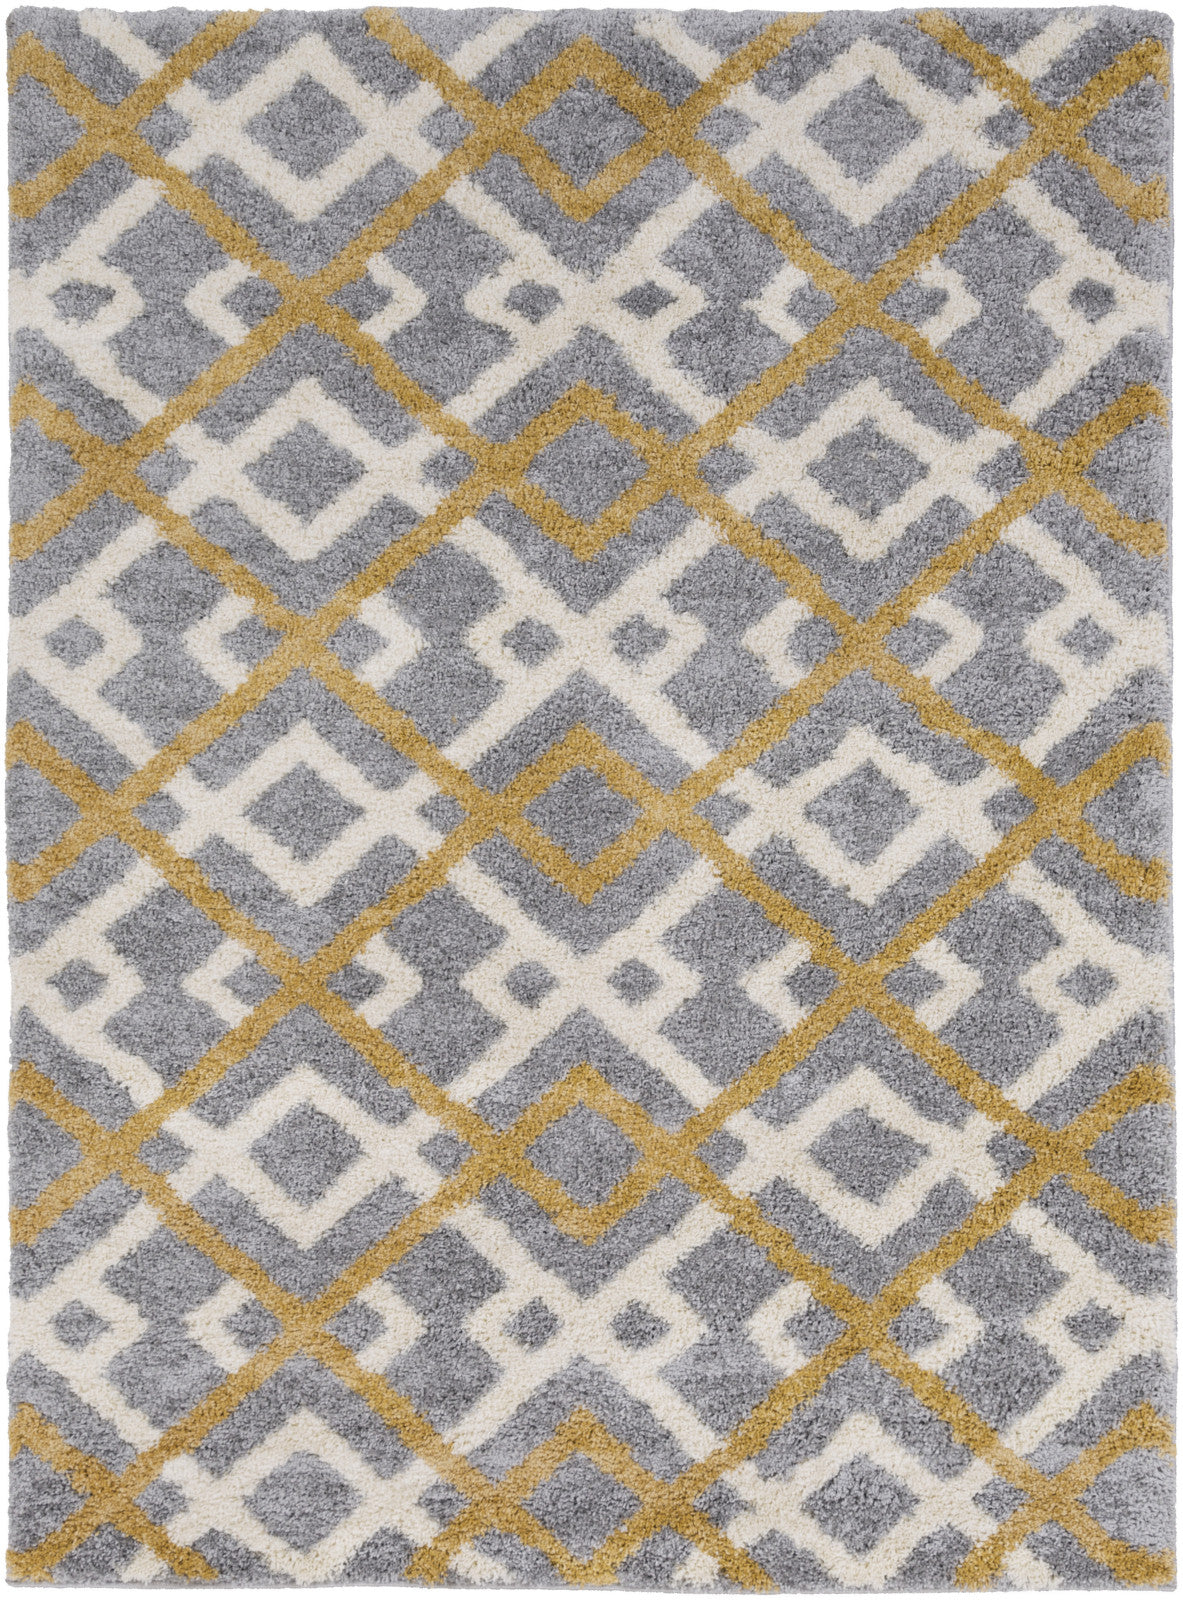 Surya Swift SWT-4022 Area Rug by Candice Olson